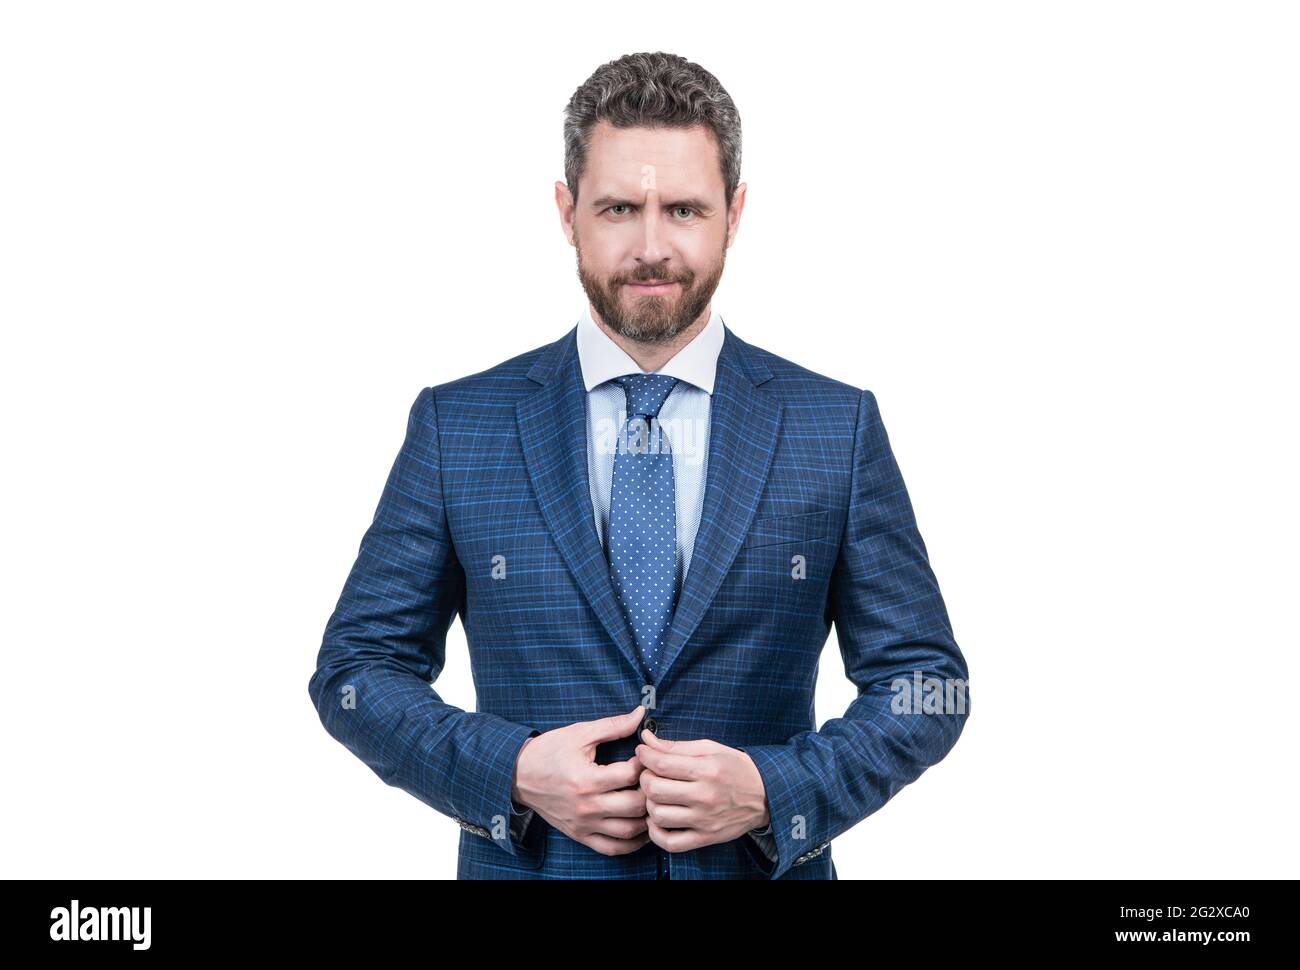 Clothes that mean business. Professional man in suit. Professional occupation and career Stock Photo